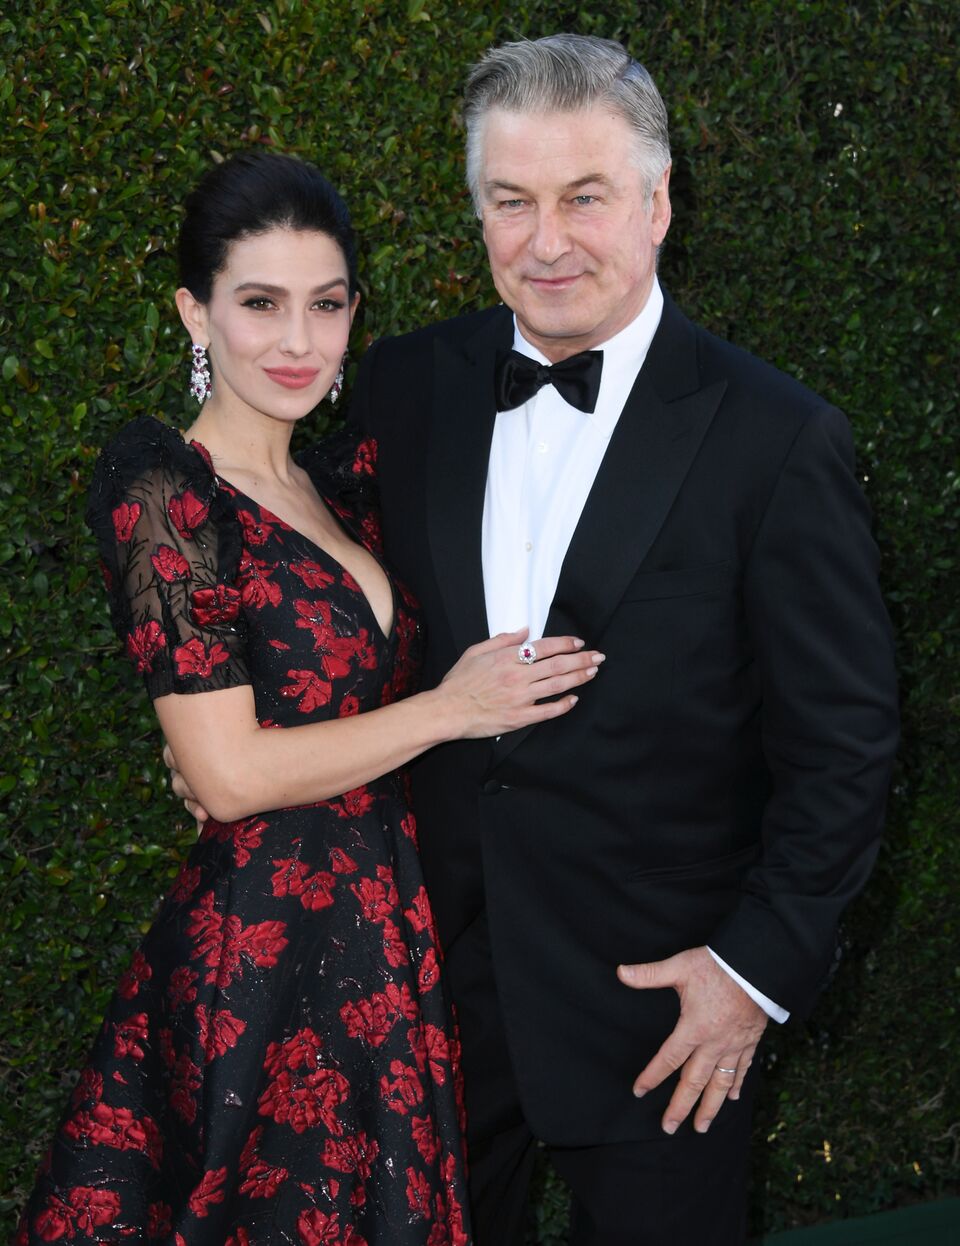 Hilaria Baldwin and Alec Baldwin attend 25th Annual Screen Actors Guild Awards. | Source: Getty Images